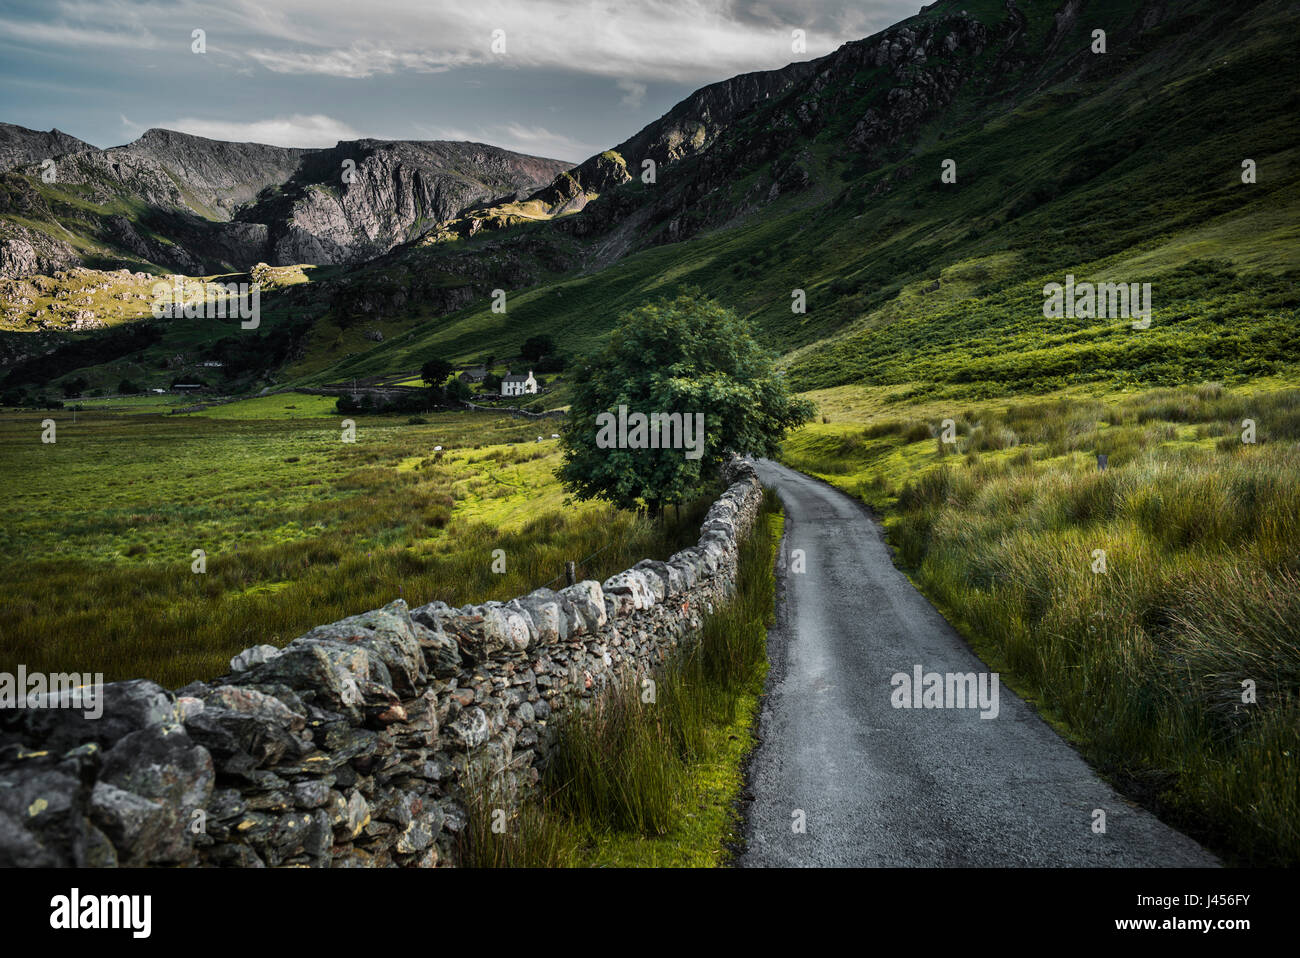 A distant farmhouse at the end of single track tarmac road in a lush valley in Snowdonia, Wales, UK. Derek Hudson / Alamy Stock Photo Stock Photo